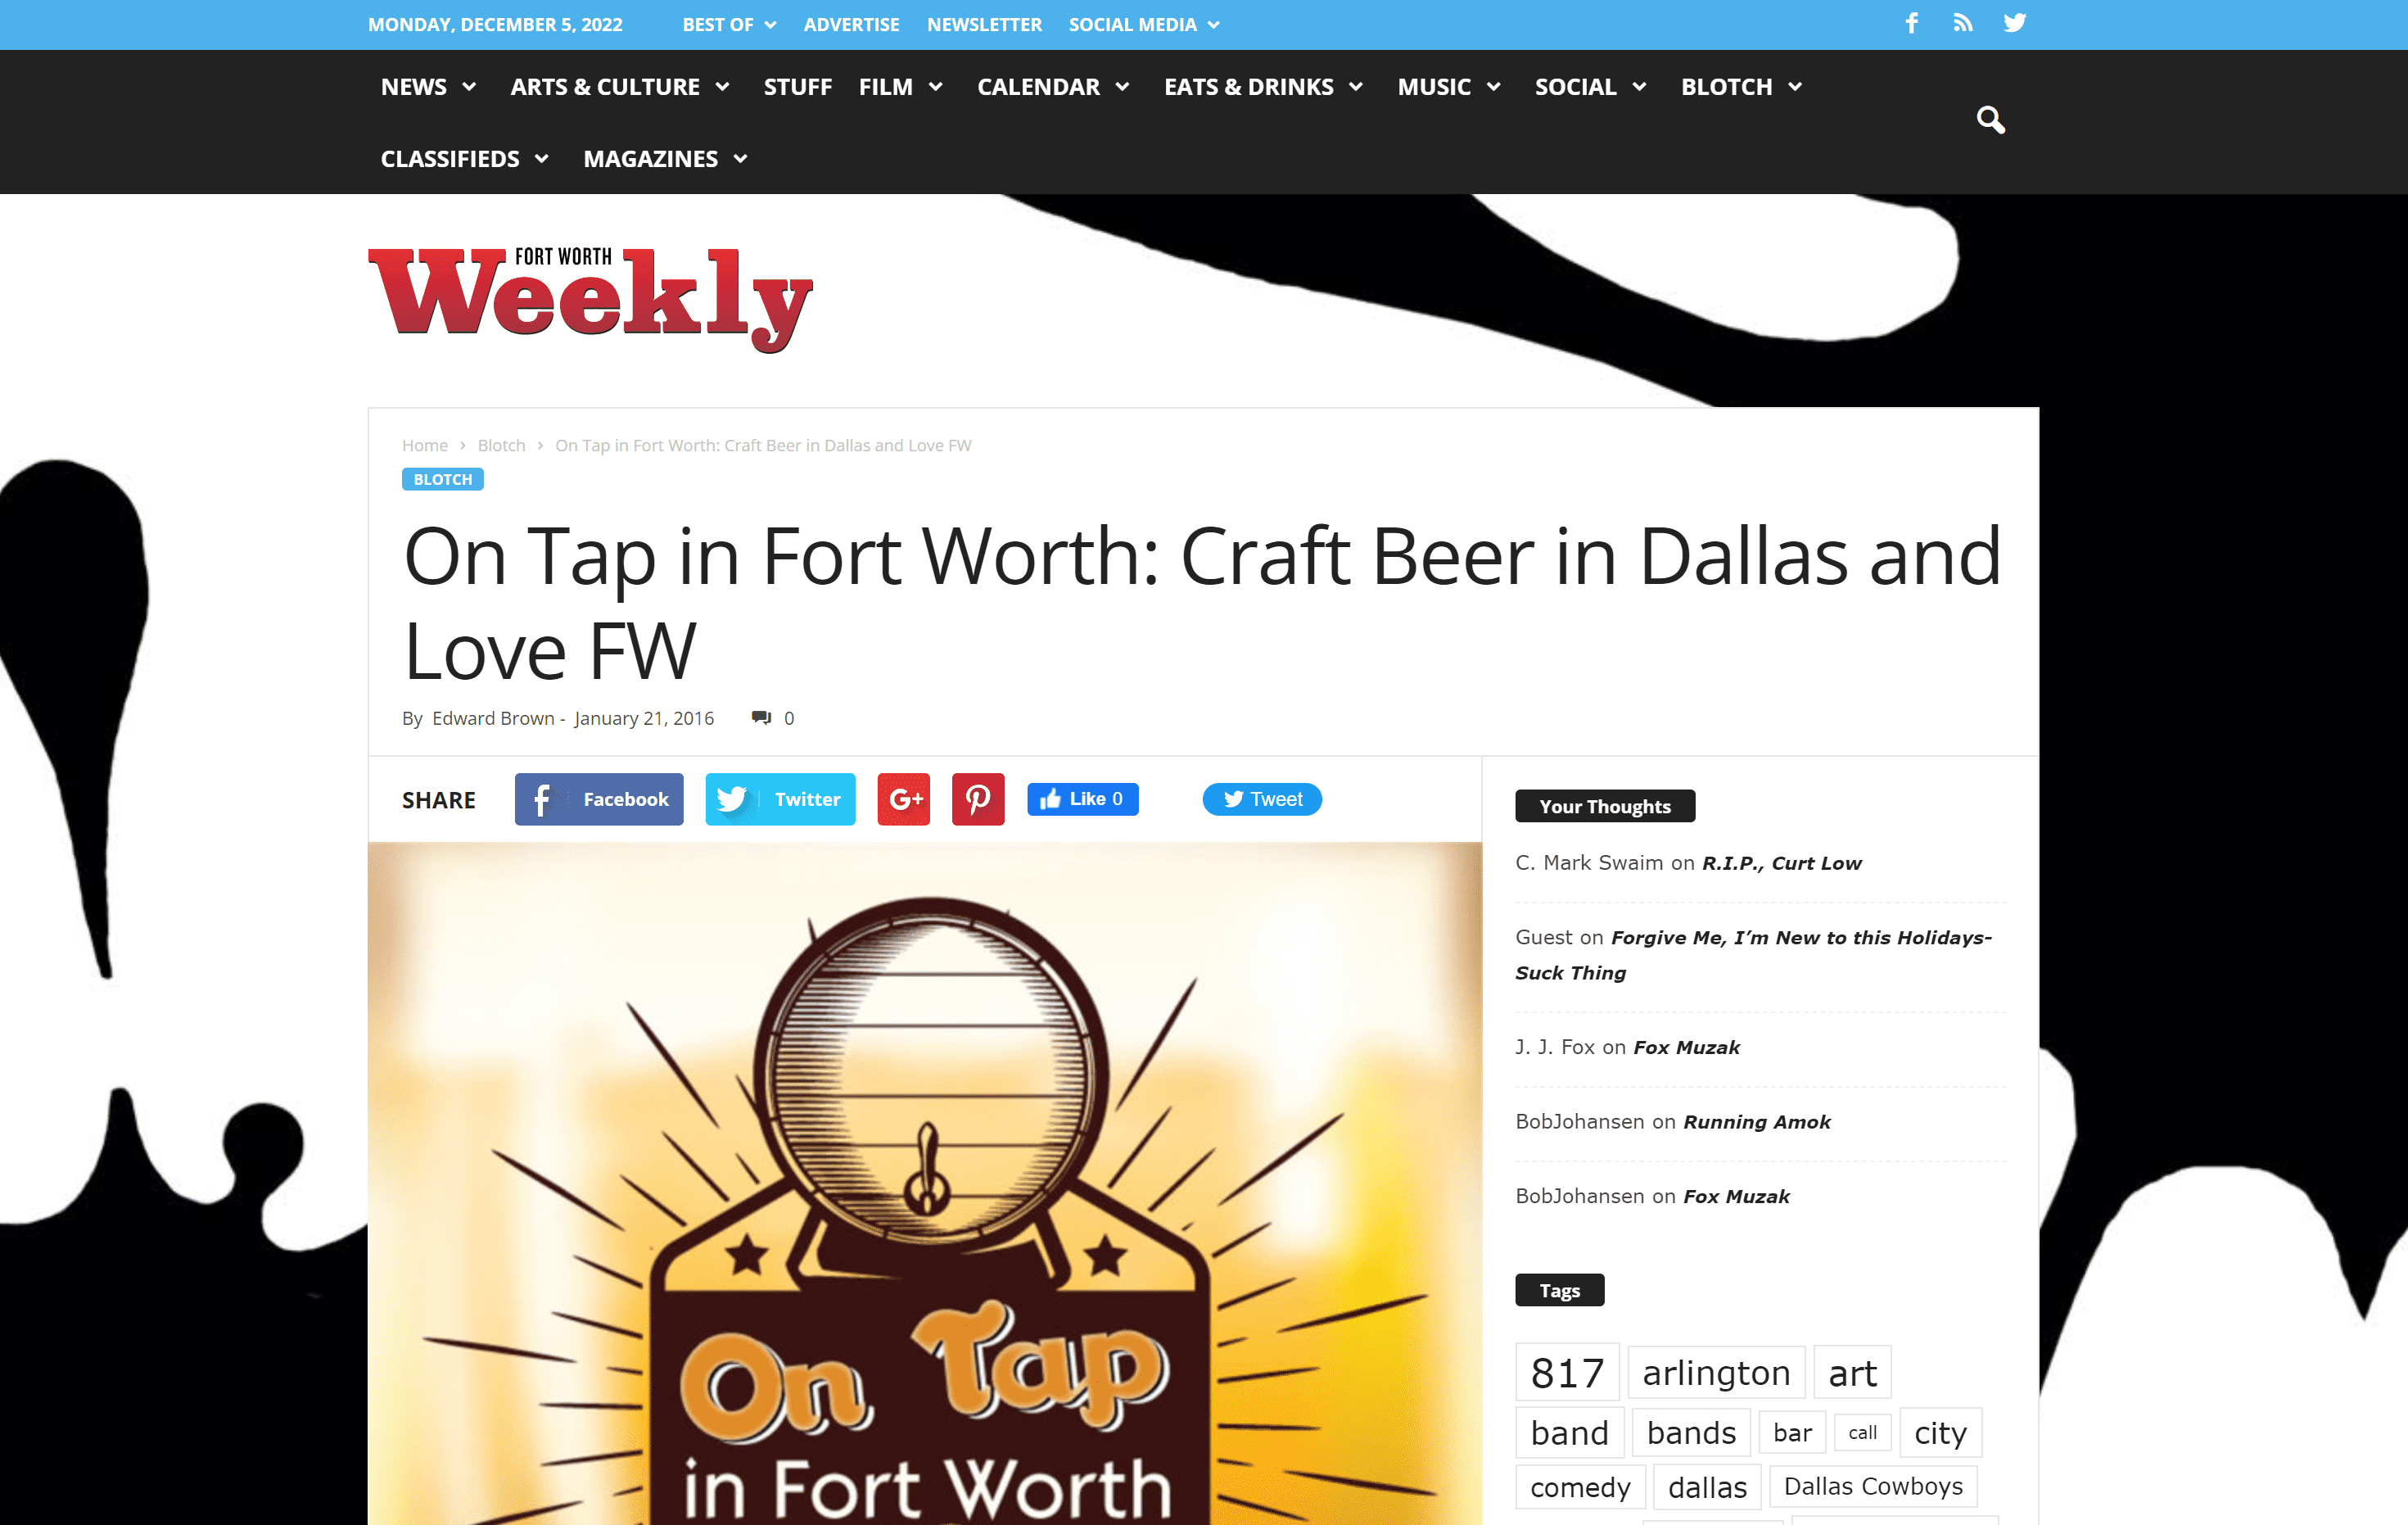 Craft Beer in Dallas in Fort Worth Weekly